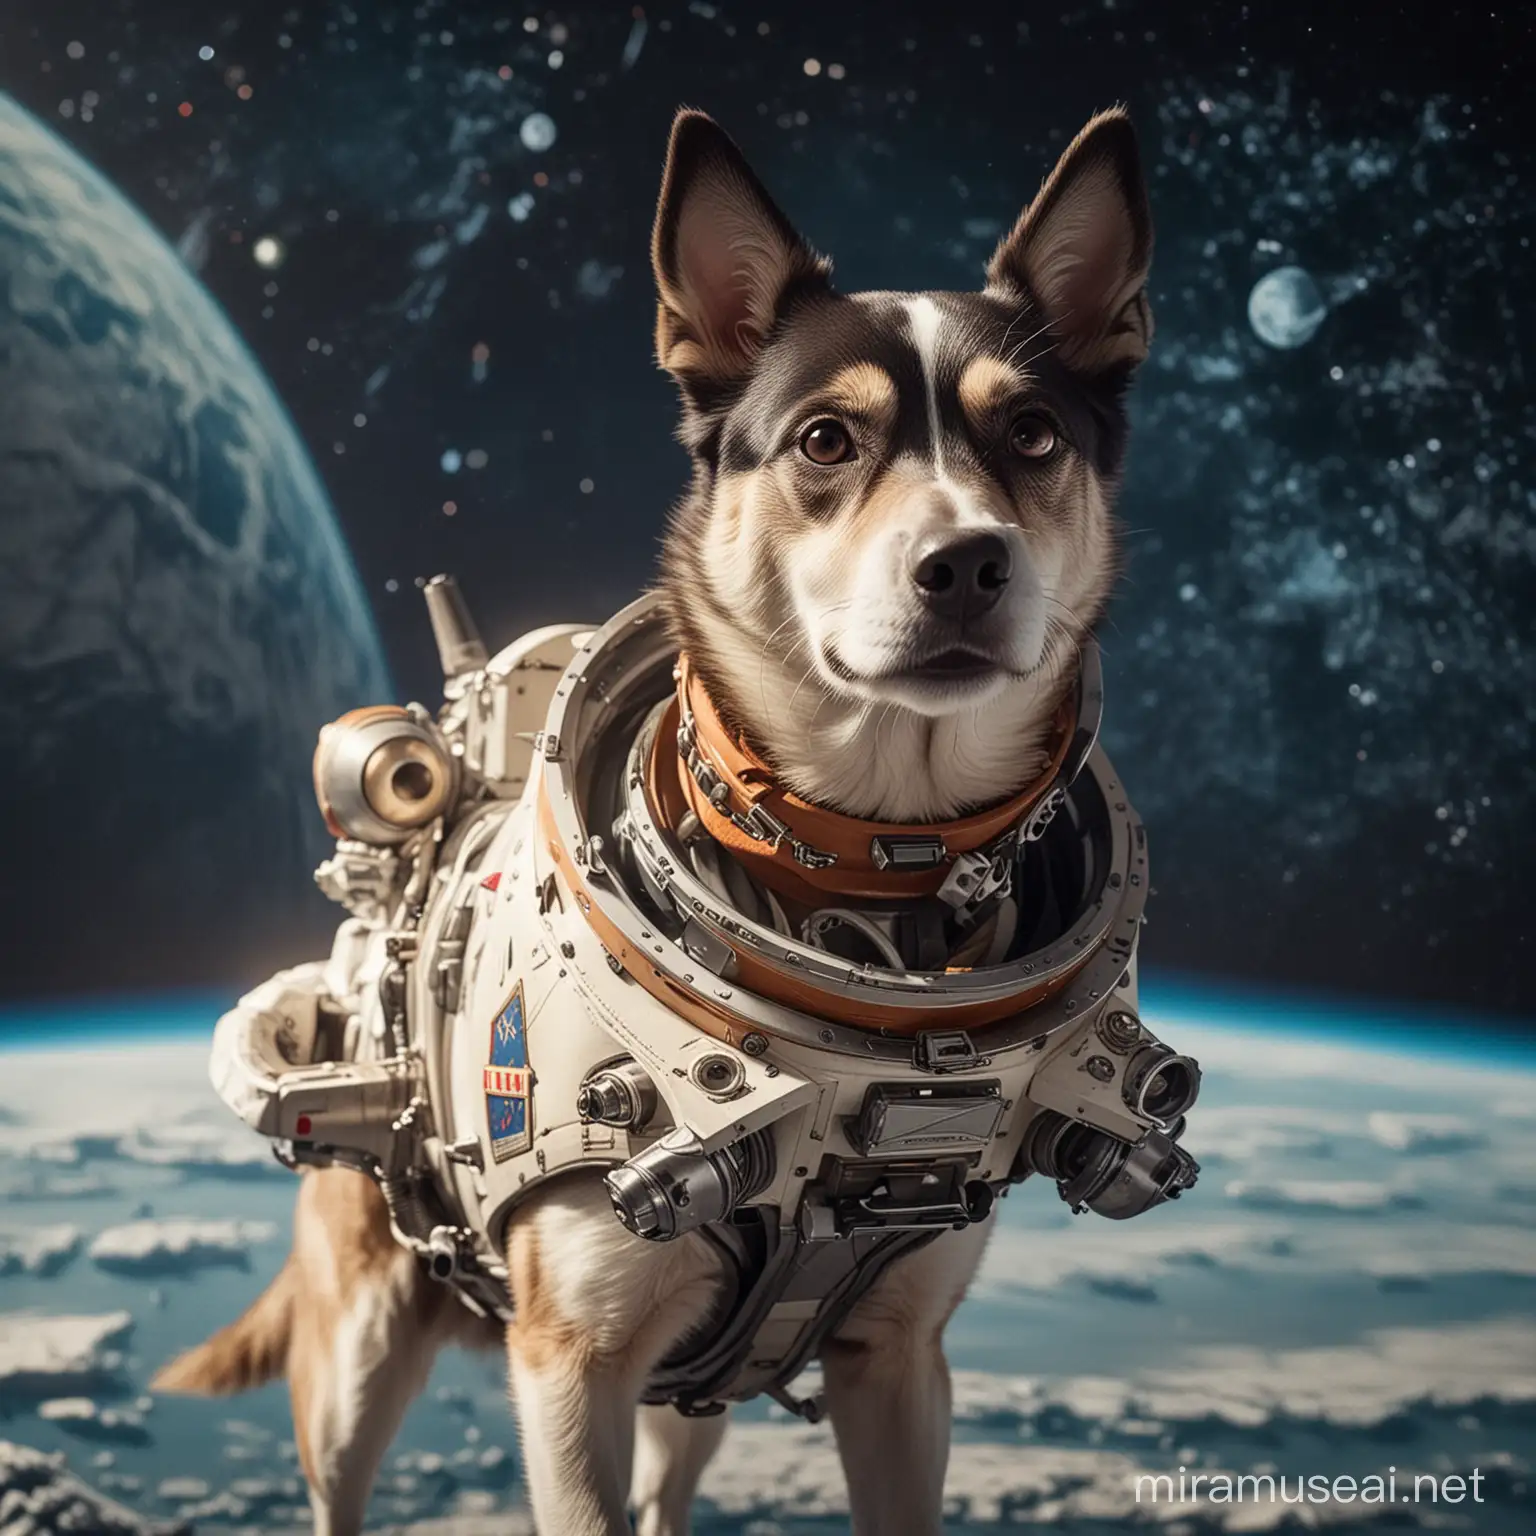 laika first dog to space with solana space ship
